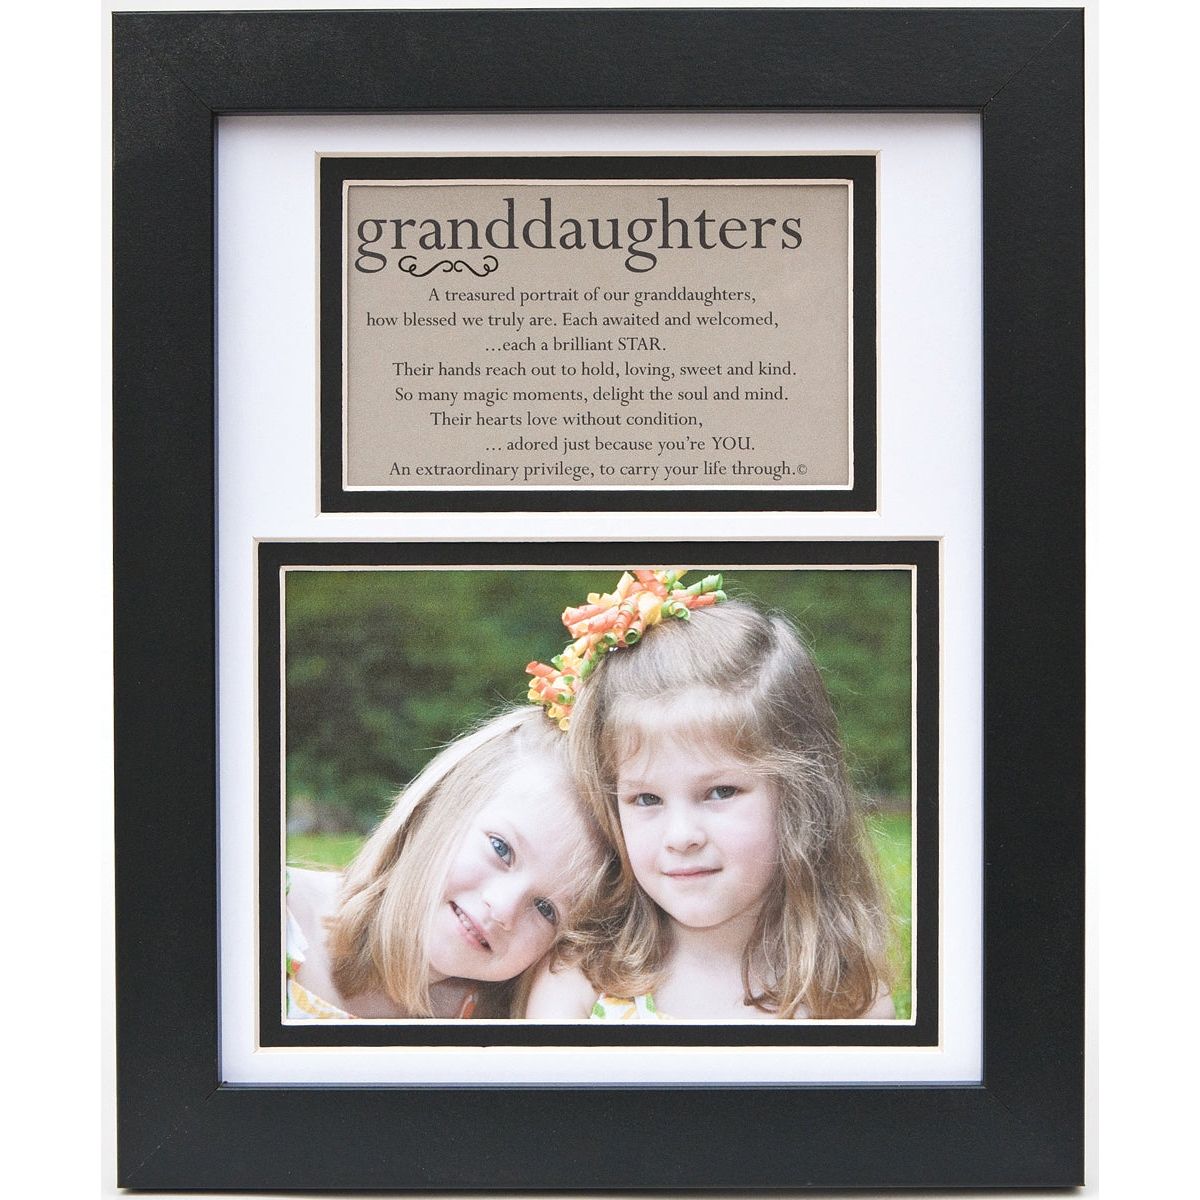 8x10 black frame with white and black double mat, includes "Granddaughters" poem and space for photo.